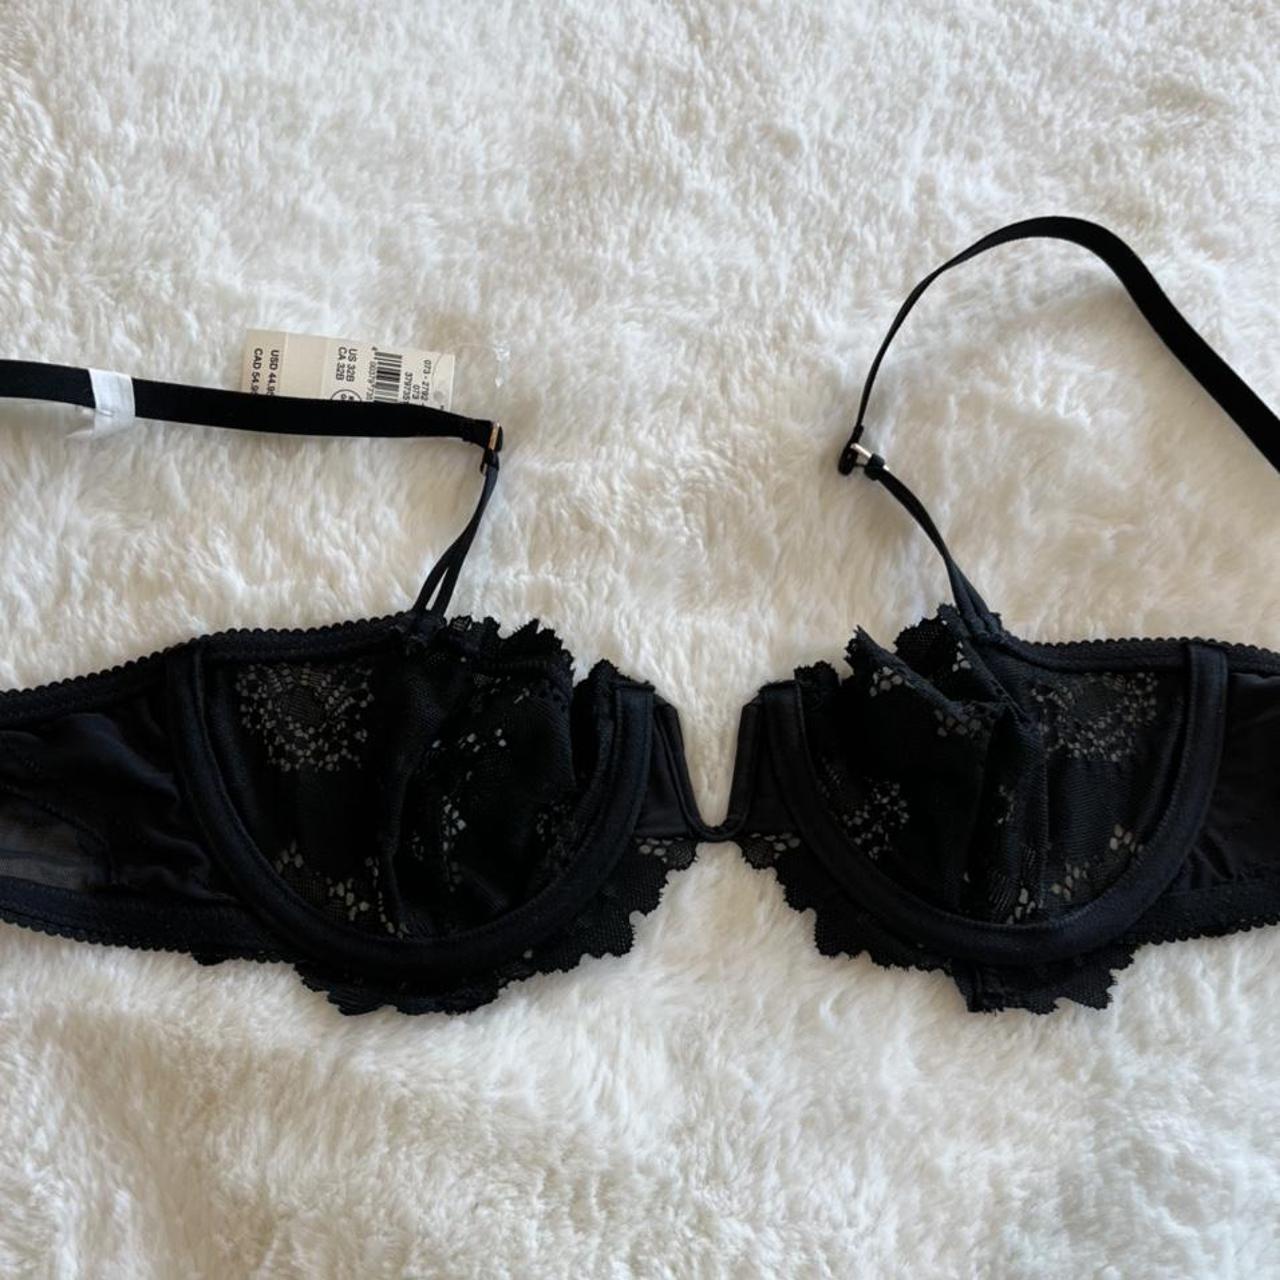 Aerie lace unlined bra in black 🖤, Brand new with